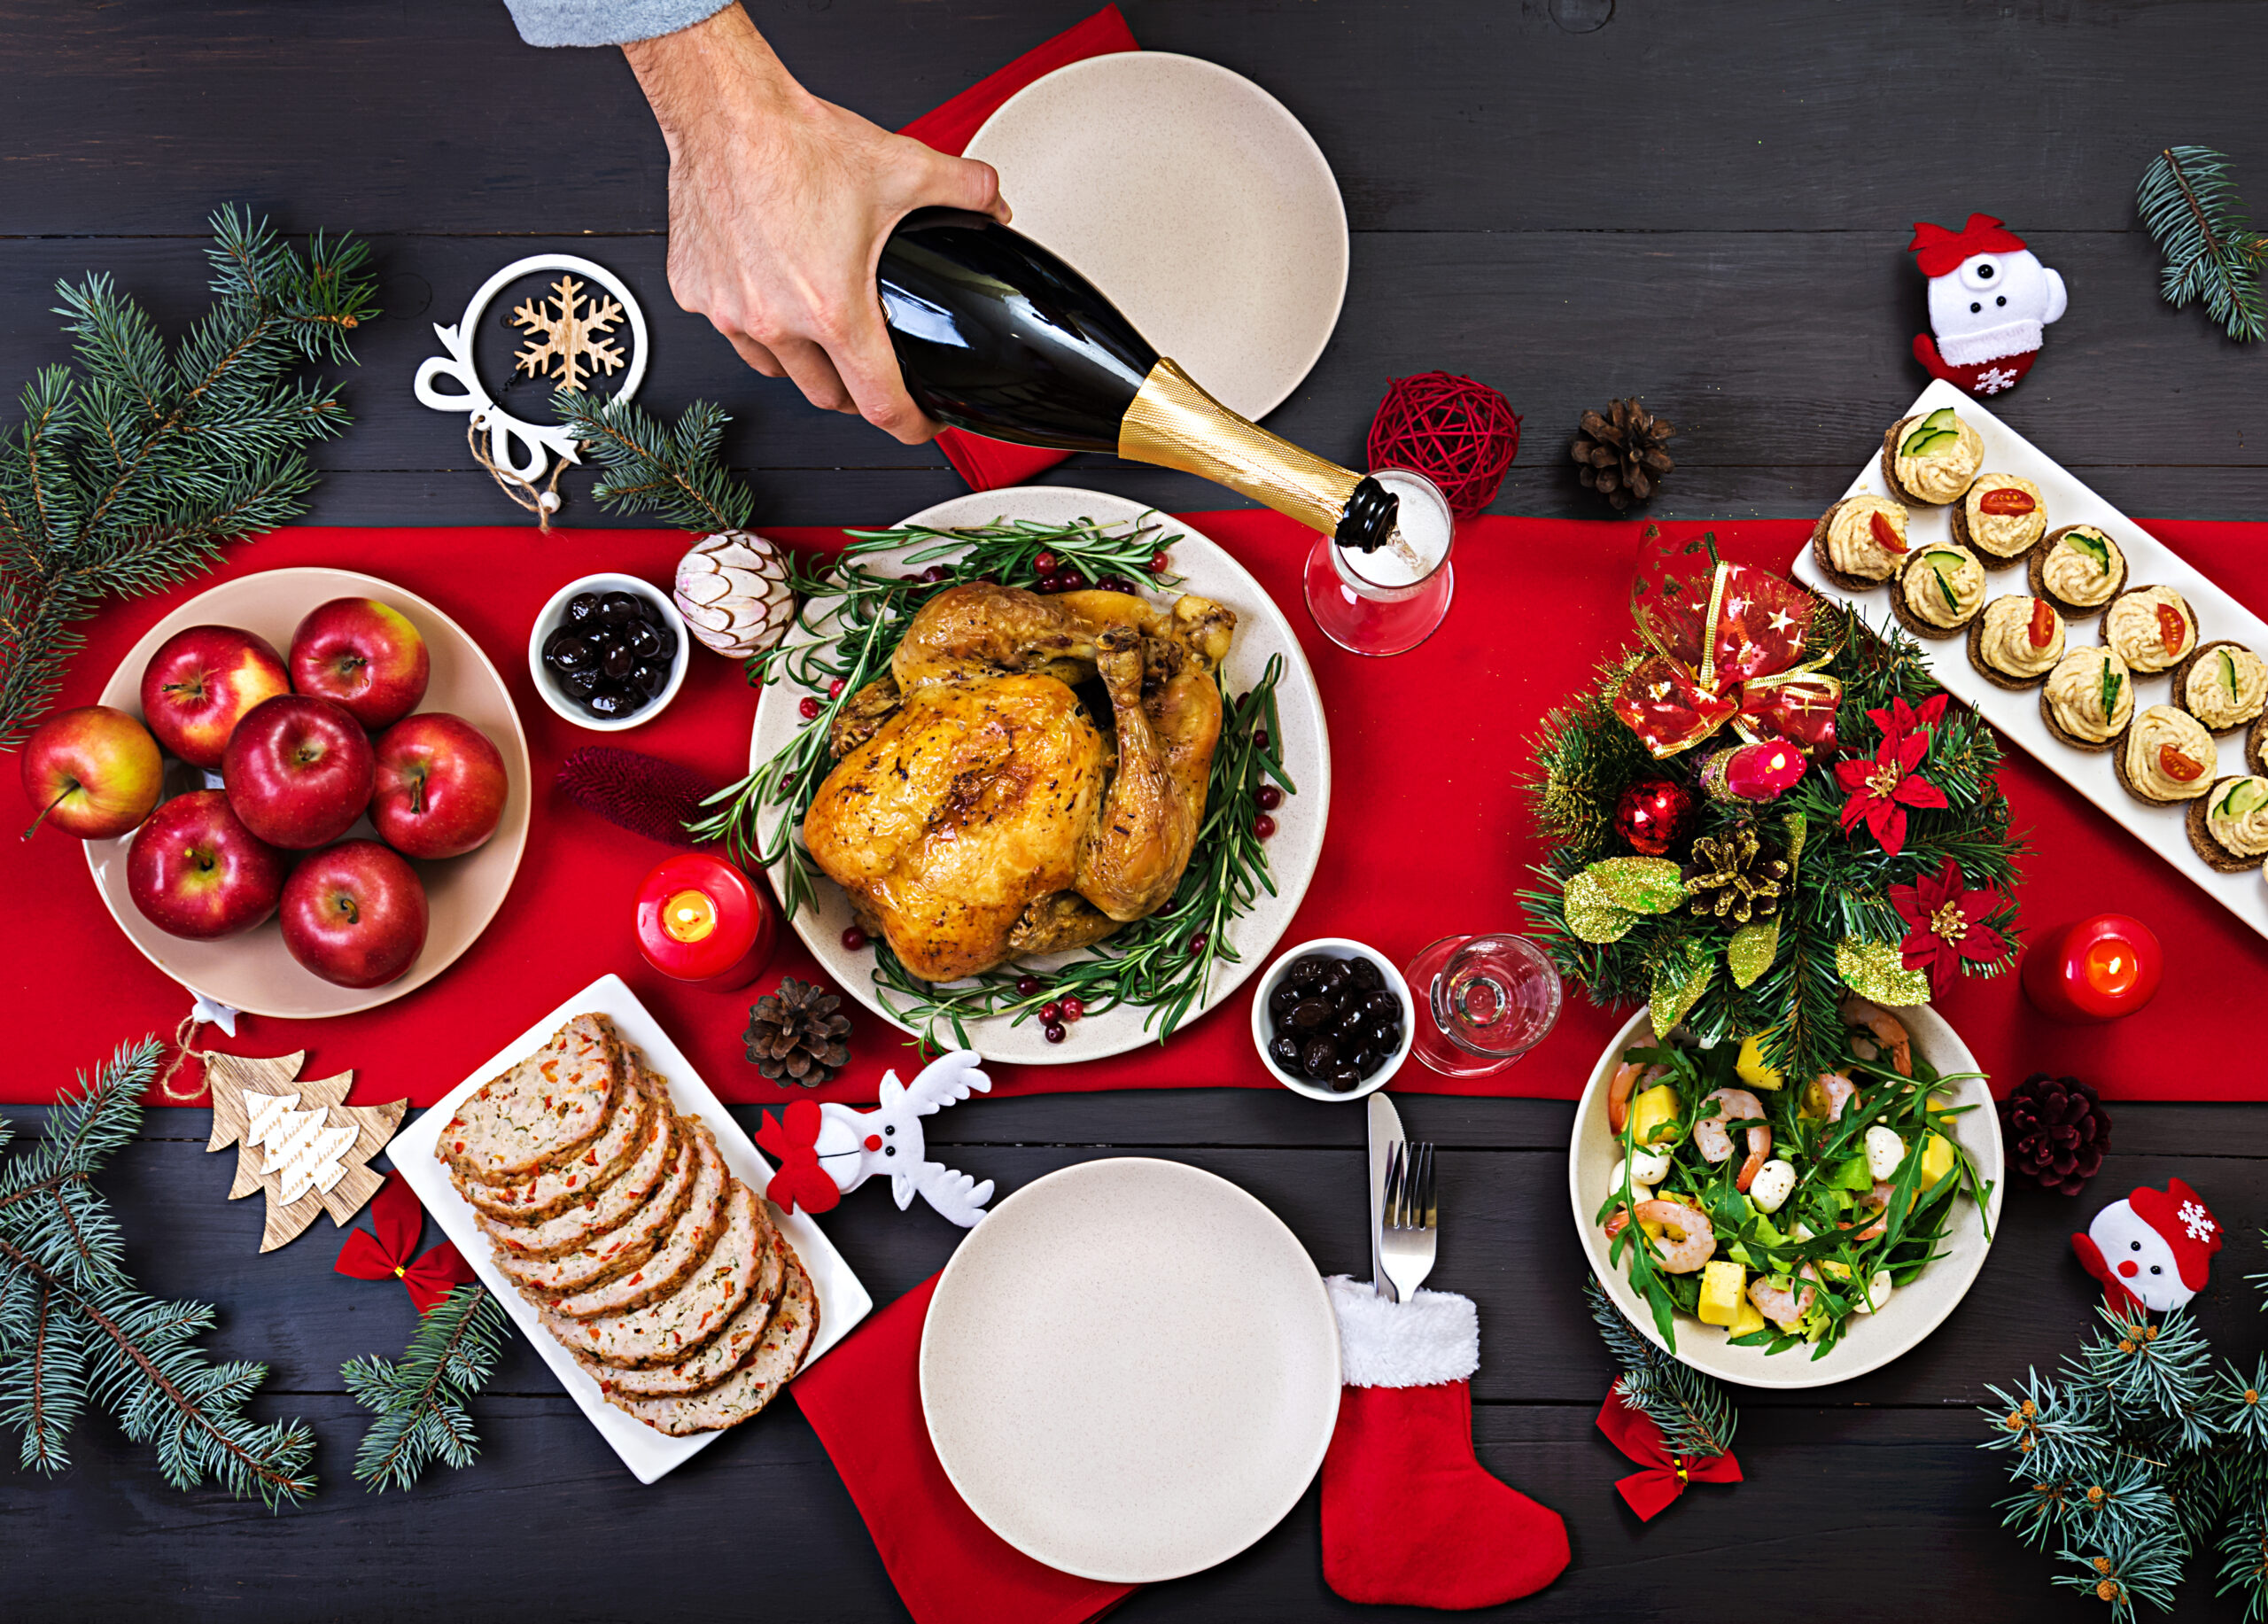 baked-turkey-christmas-dinner-the-christmas-table-is-served-with-turkey-decorated-with-bright-tinsel-and-candles-fried-chicken-table-family-dinner-top-view